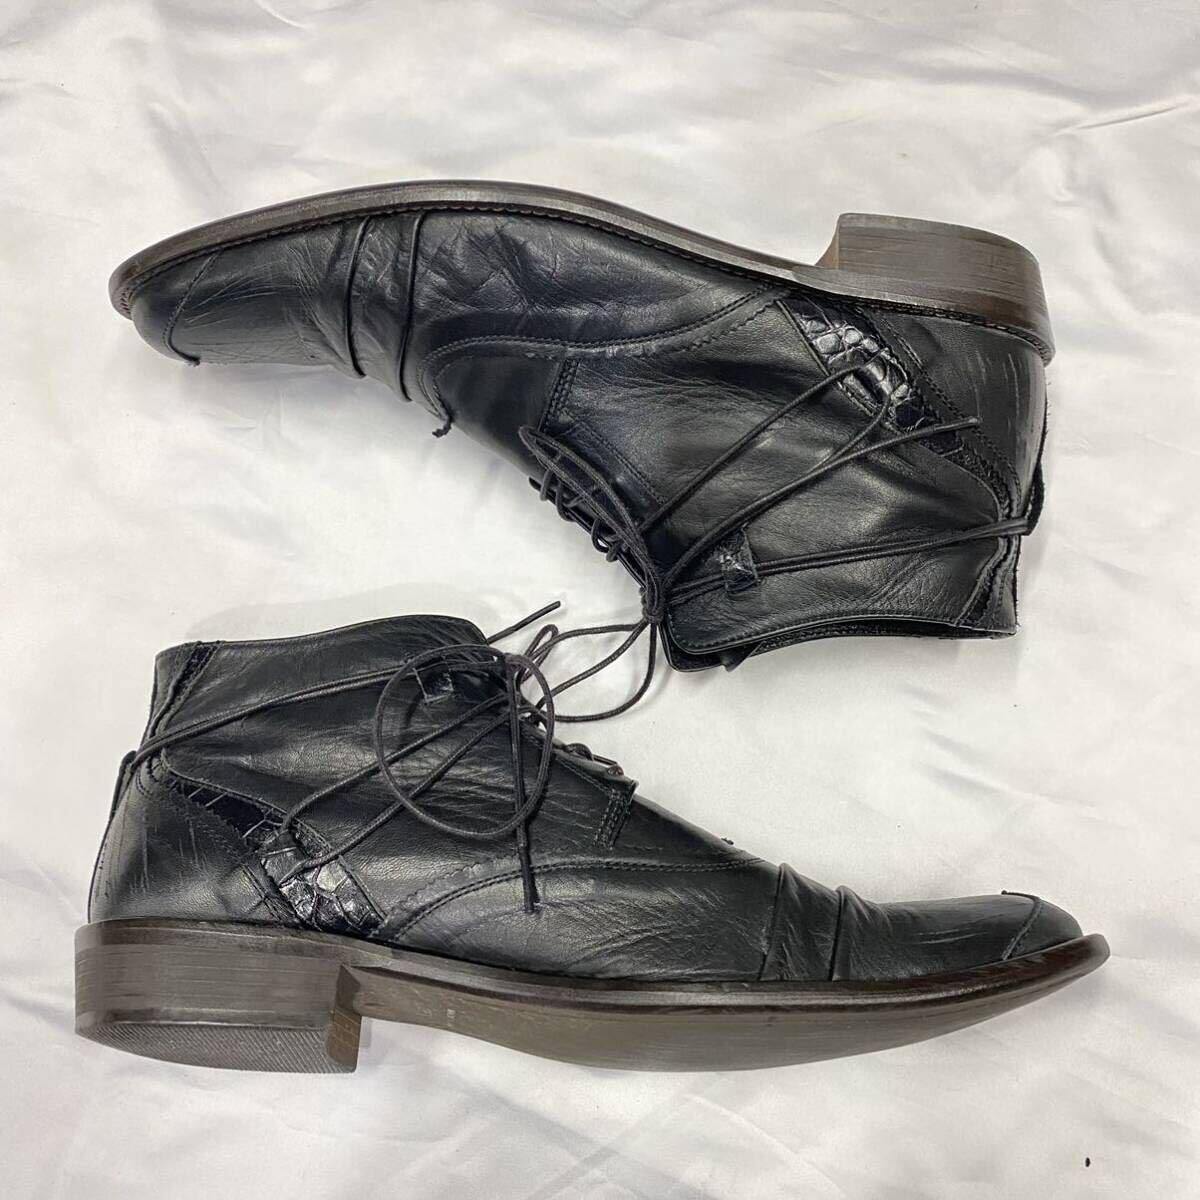 Rare 00\'s JAPANESE LABEL Lace-up draping leather boots archive goa ifsixwasnine kmrii share spirit lgb 14th addiction